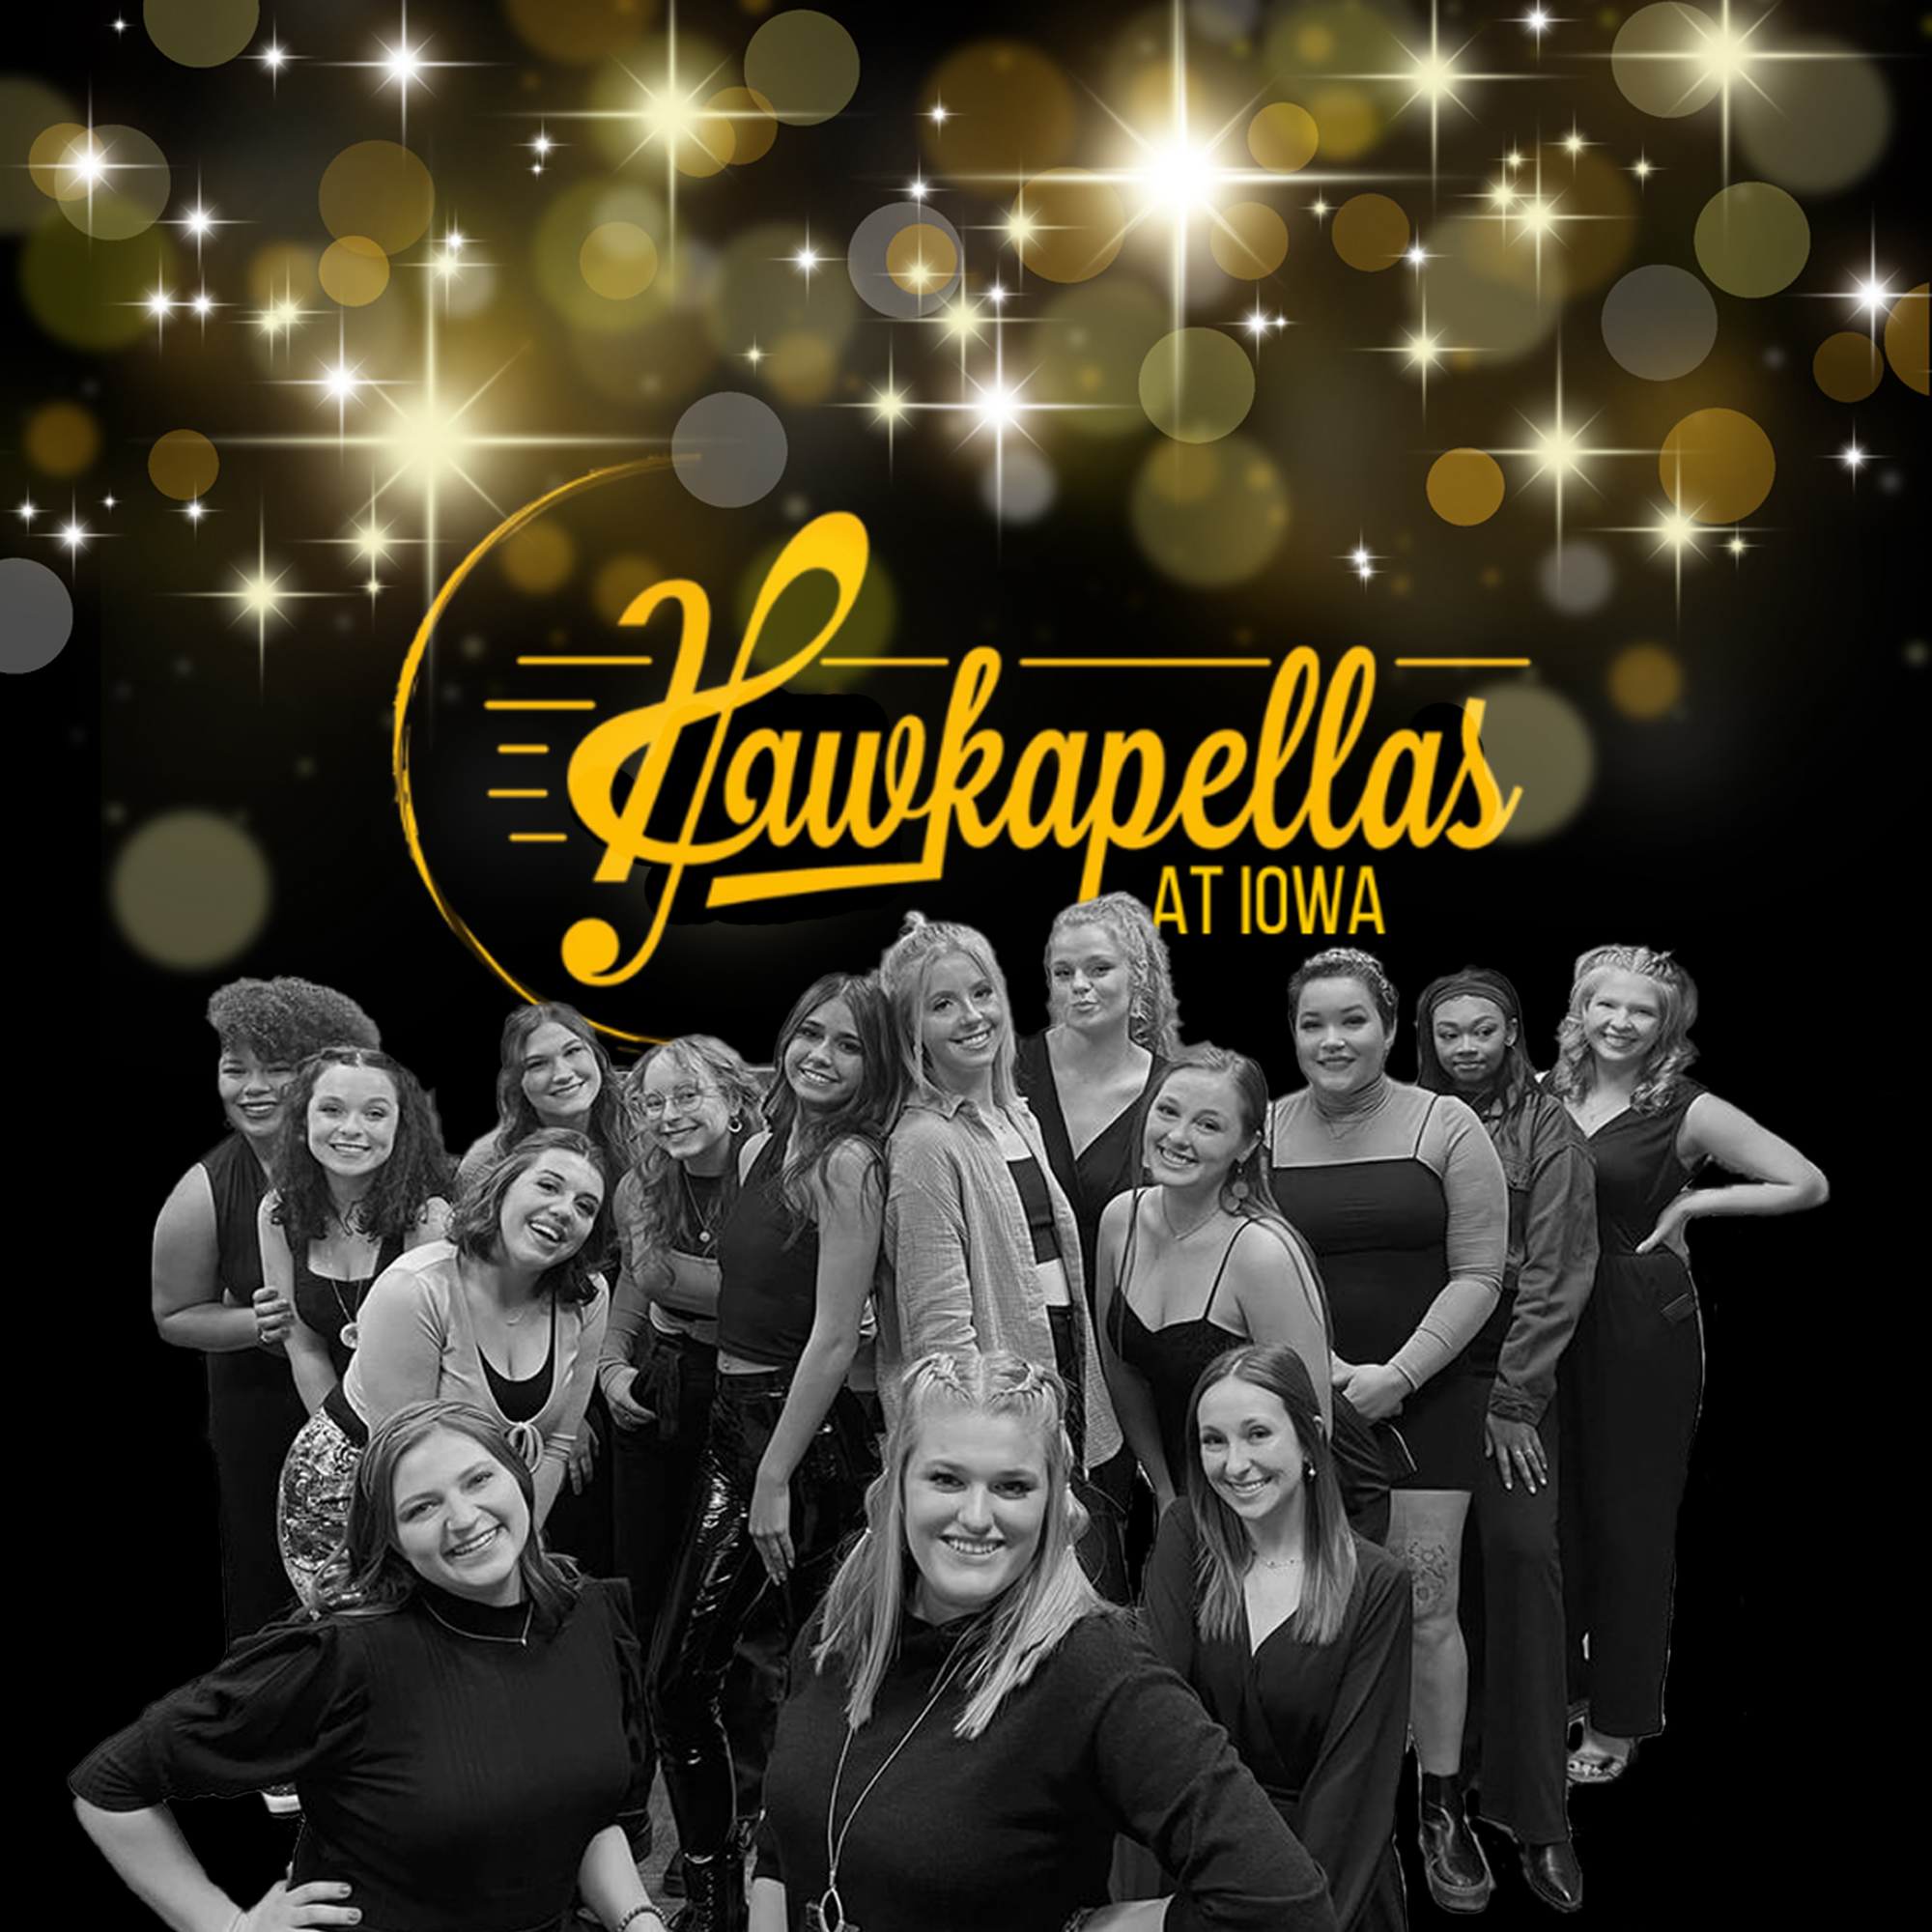 A group of women in front of a "Hawkapellas at Iowa" sign with a gold glittery background